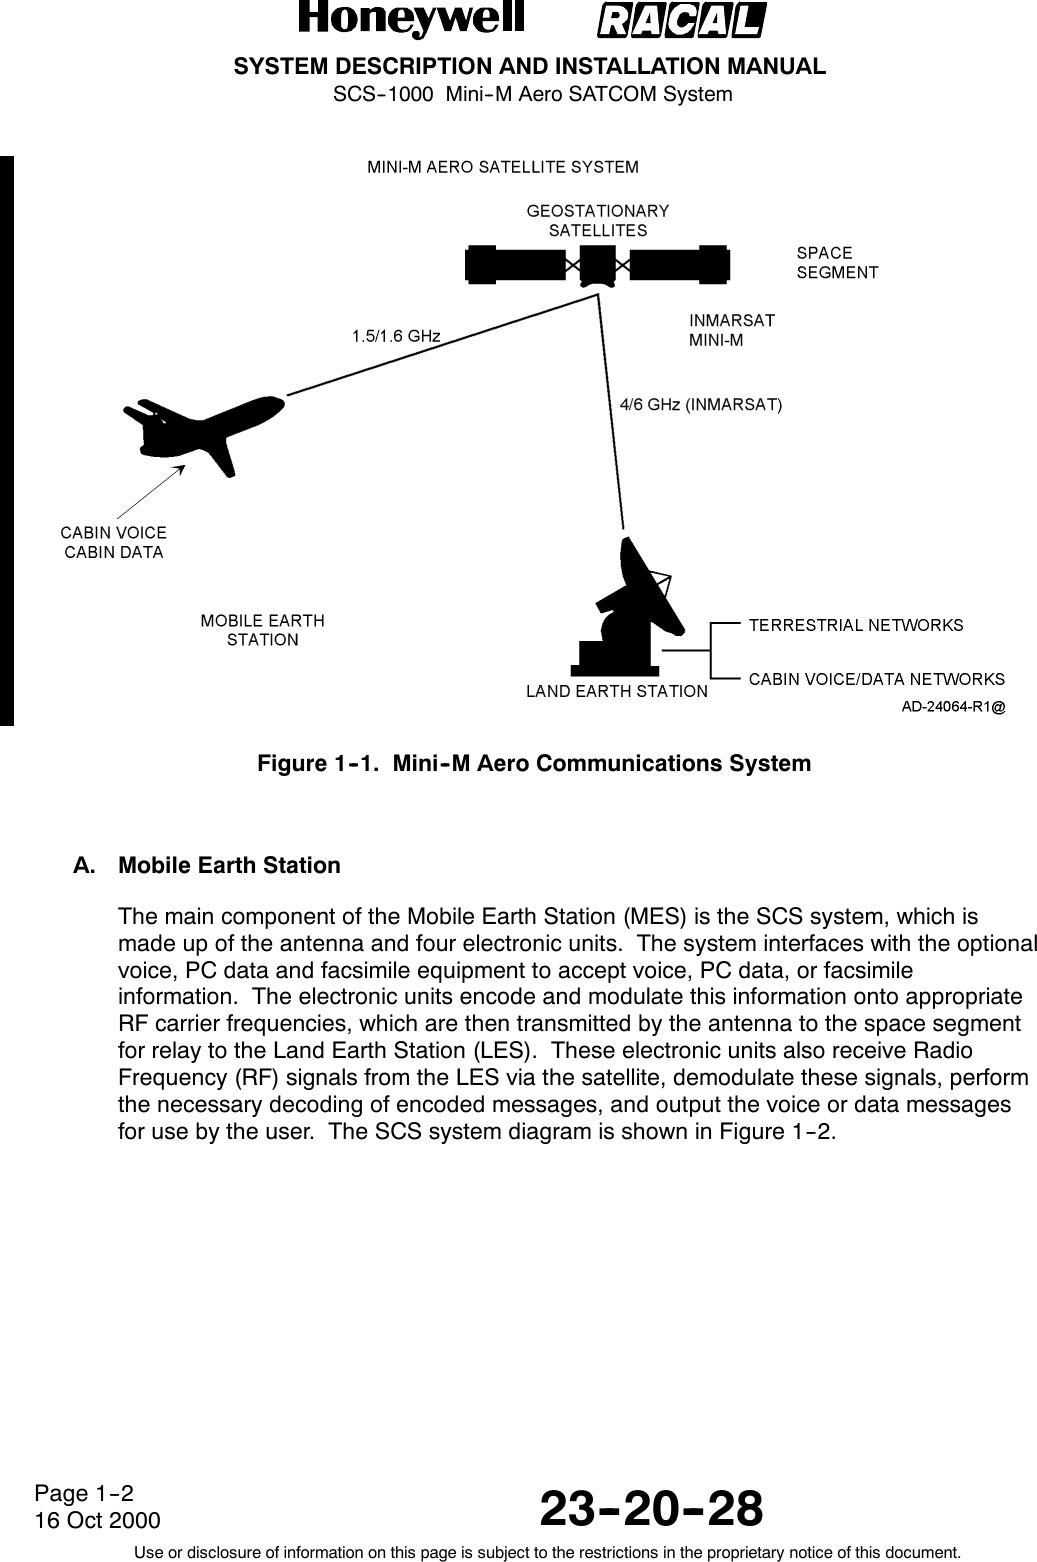 SYSTEM DESCRIPTION AND INSTALLATION MANUALSCS--1000 Mini--M Aero SATCOM System23--20--28Use or disclosure of information on this page is subject to the restrictions in the proprietary notice of this document.Page 1--216 Oct 2000Figure 1--1. Mini--M Aero Communications SystemA. Mobile Earth StationThe main component of the Mobile Earth Station (MES) is the SCS system, which ismade up of the antenna and four electronic units. The system interfaces with the optionalvoice, PC data and facsimile equipment to accept voice, PC data, or facsimileinformation. The electronic units encode and modulate this information onto appropriateRF carrier frequencies, which are then transmitted by the antenna to the space segmentfor relay to the Land Earth Station (LES). These electronic units also receive RadioFrequency (RF) signals from the LES via the satellite, demodulate these signals, performthe necessary decoding of encoded messages, and output the voice or data messagesfor use by the user. The SCS system diagram is shown in Figure 1--2.